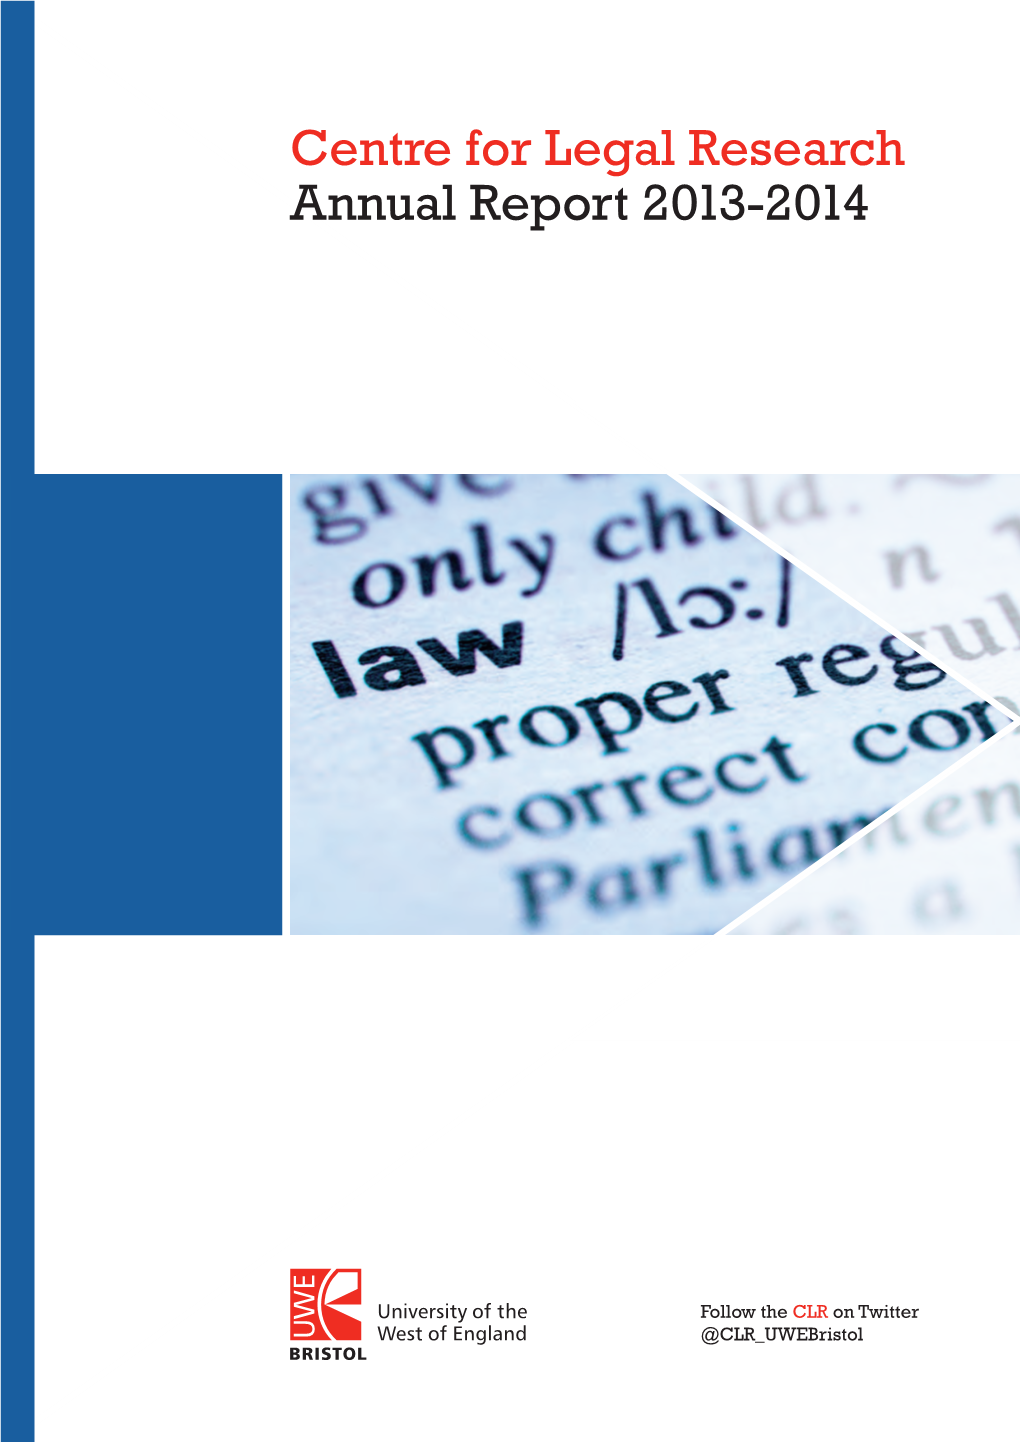 Centre for Legal Research Annual Report 2013-2014